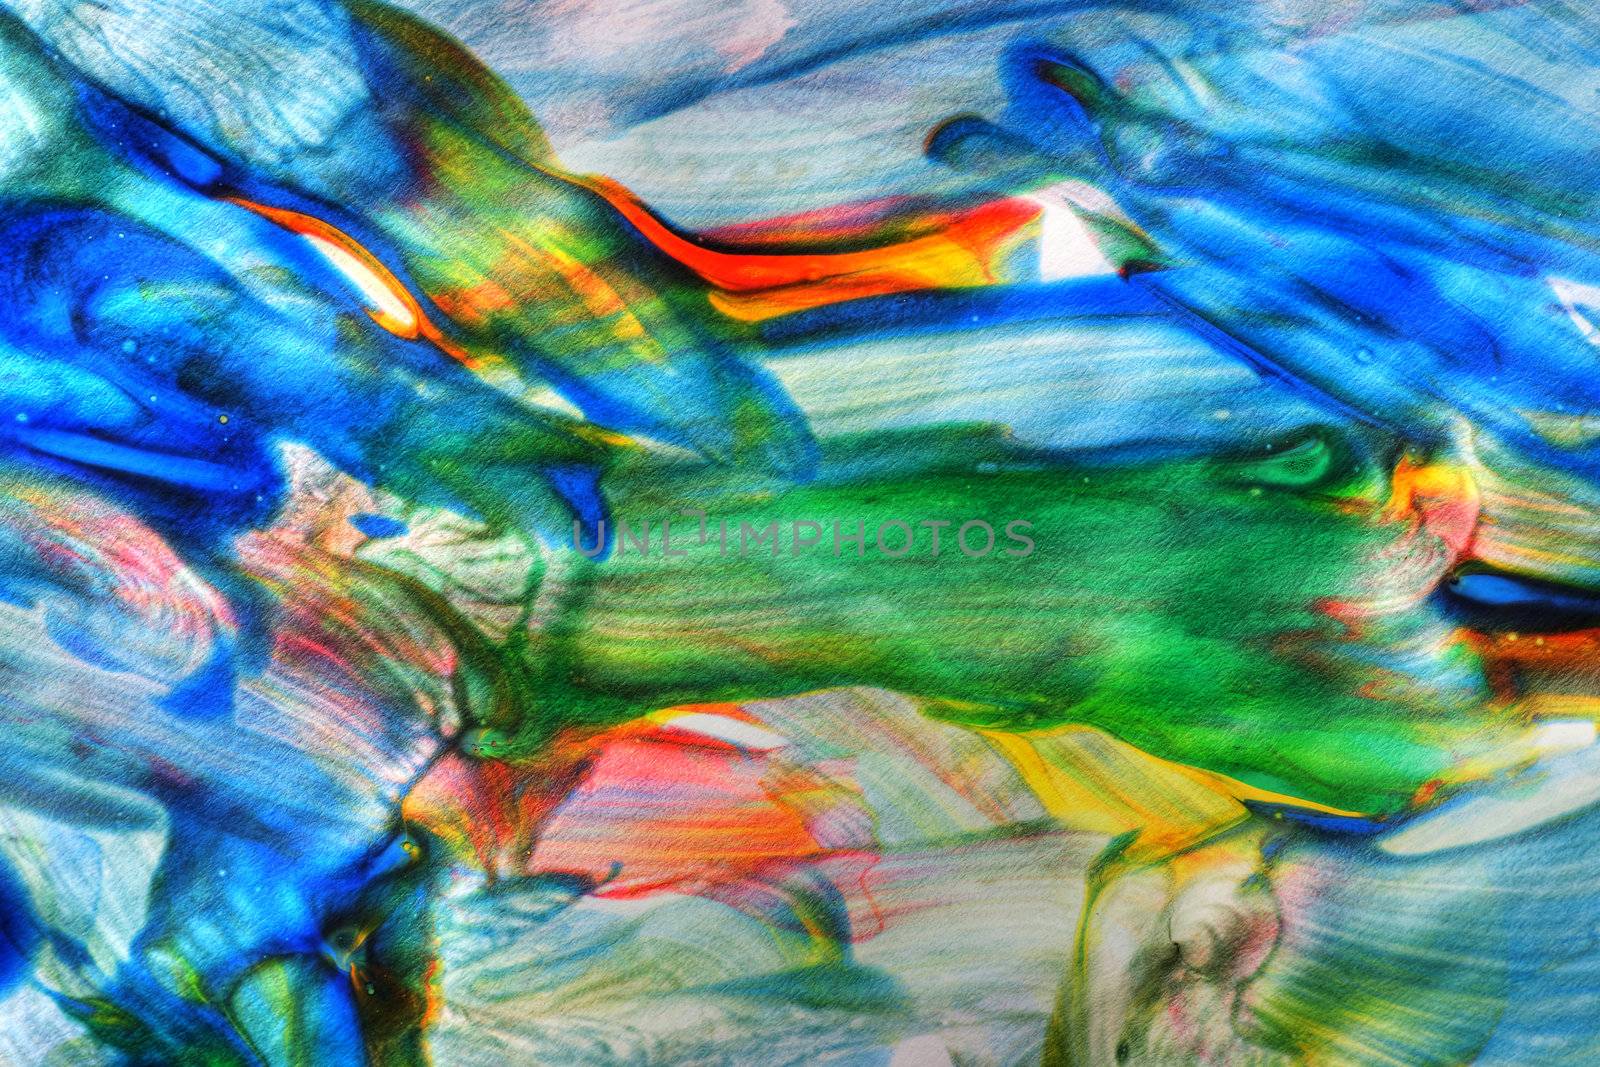 Macro shot of an original abstract watercolor painting in bright and vivid colors, great details, brush strokes and texture of paper visible; great arts background.